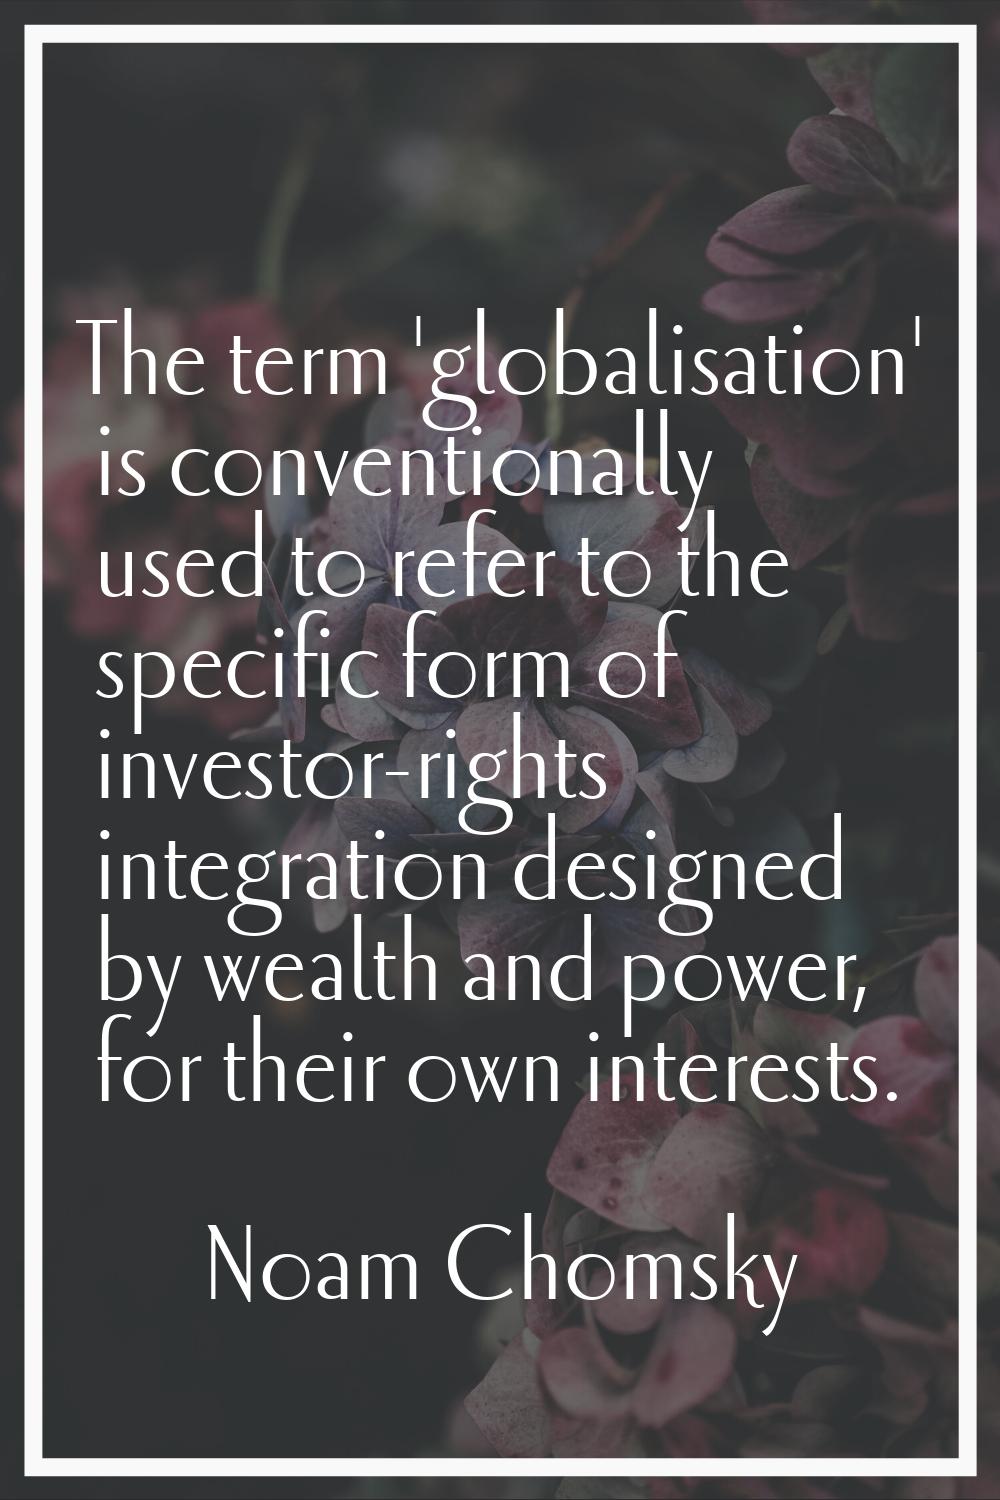 The term 'globalisation' is conventionally used to refer to the specific form of investor-rights in